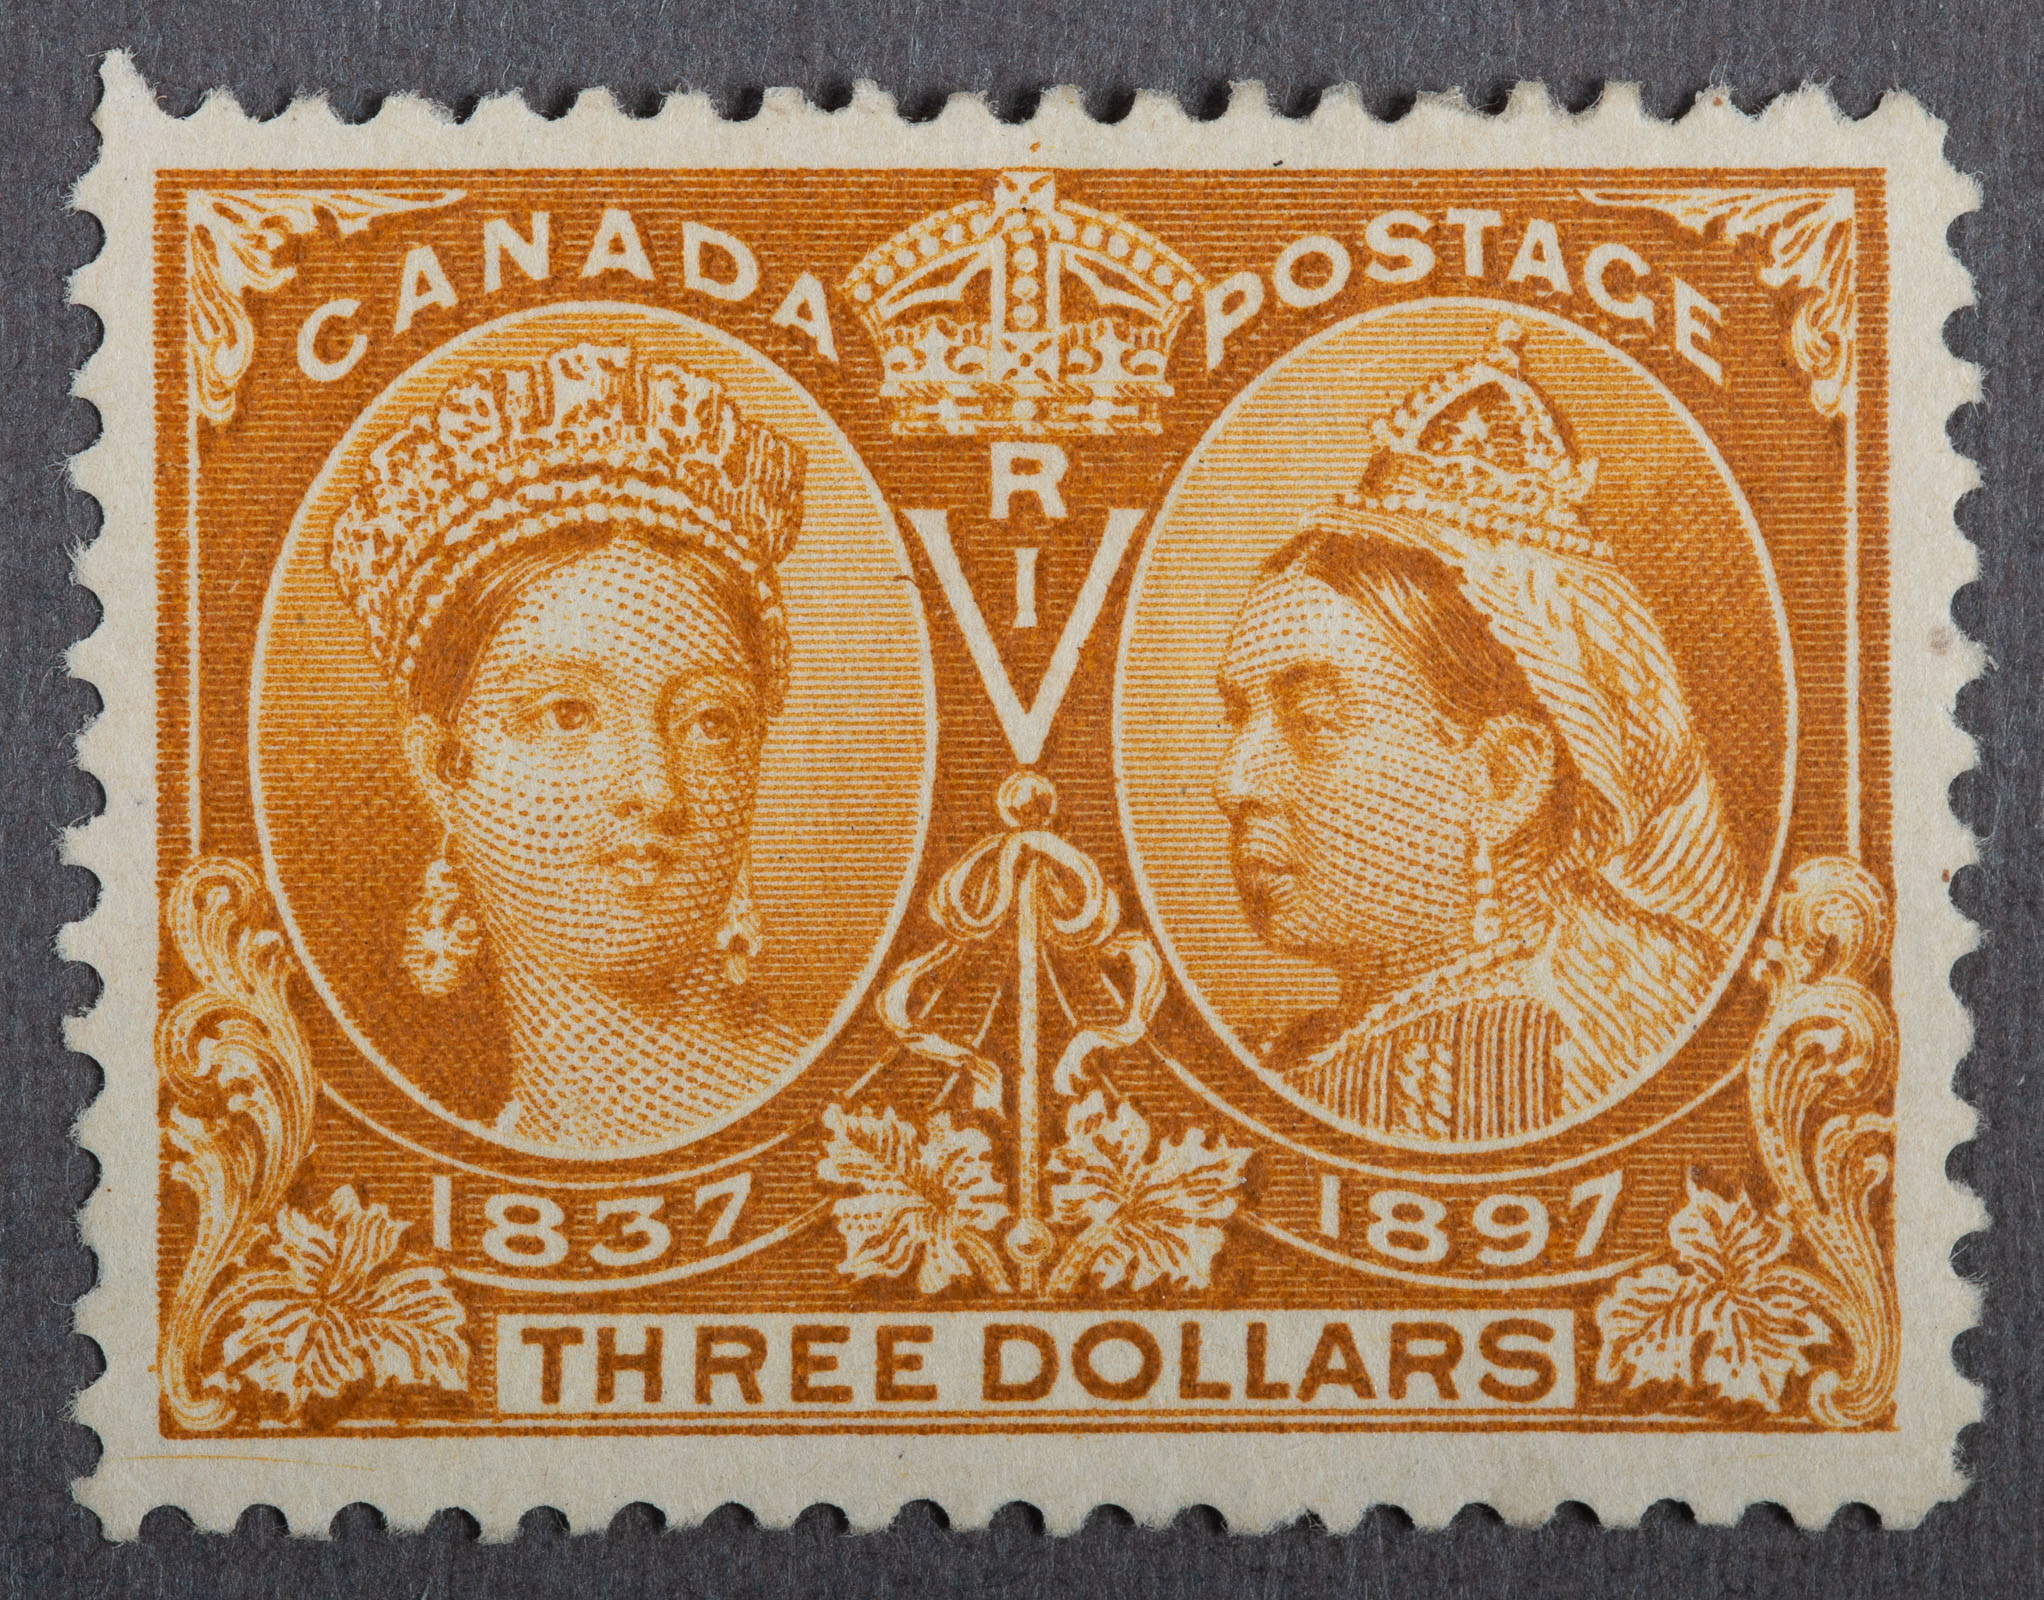 CANADA 3 POSTAGE STAMP 1897 338a09